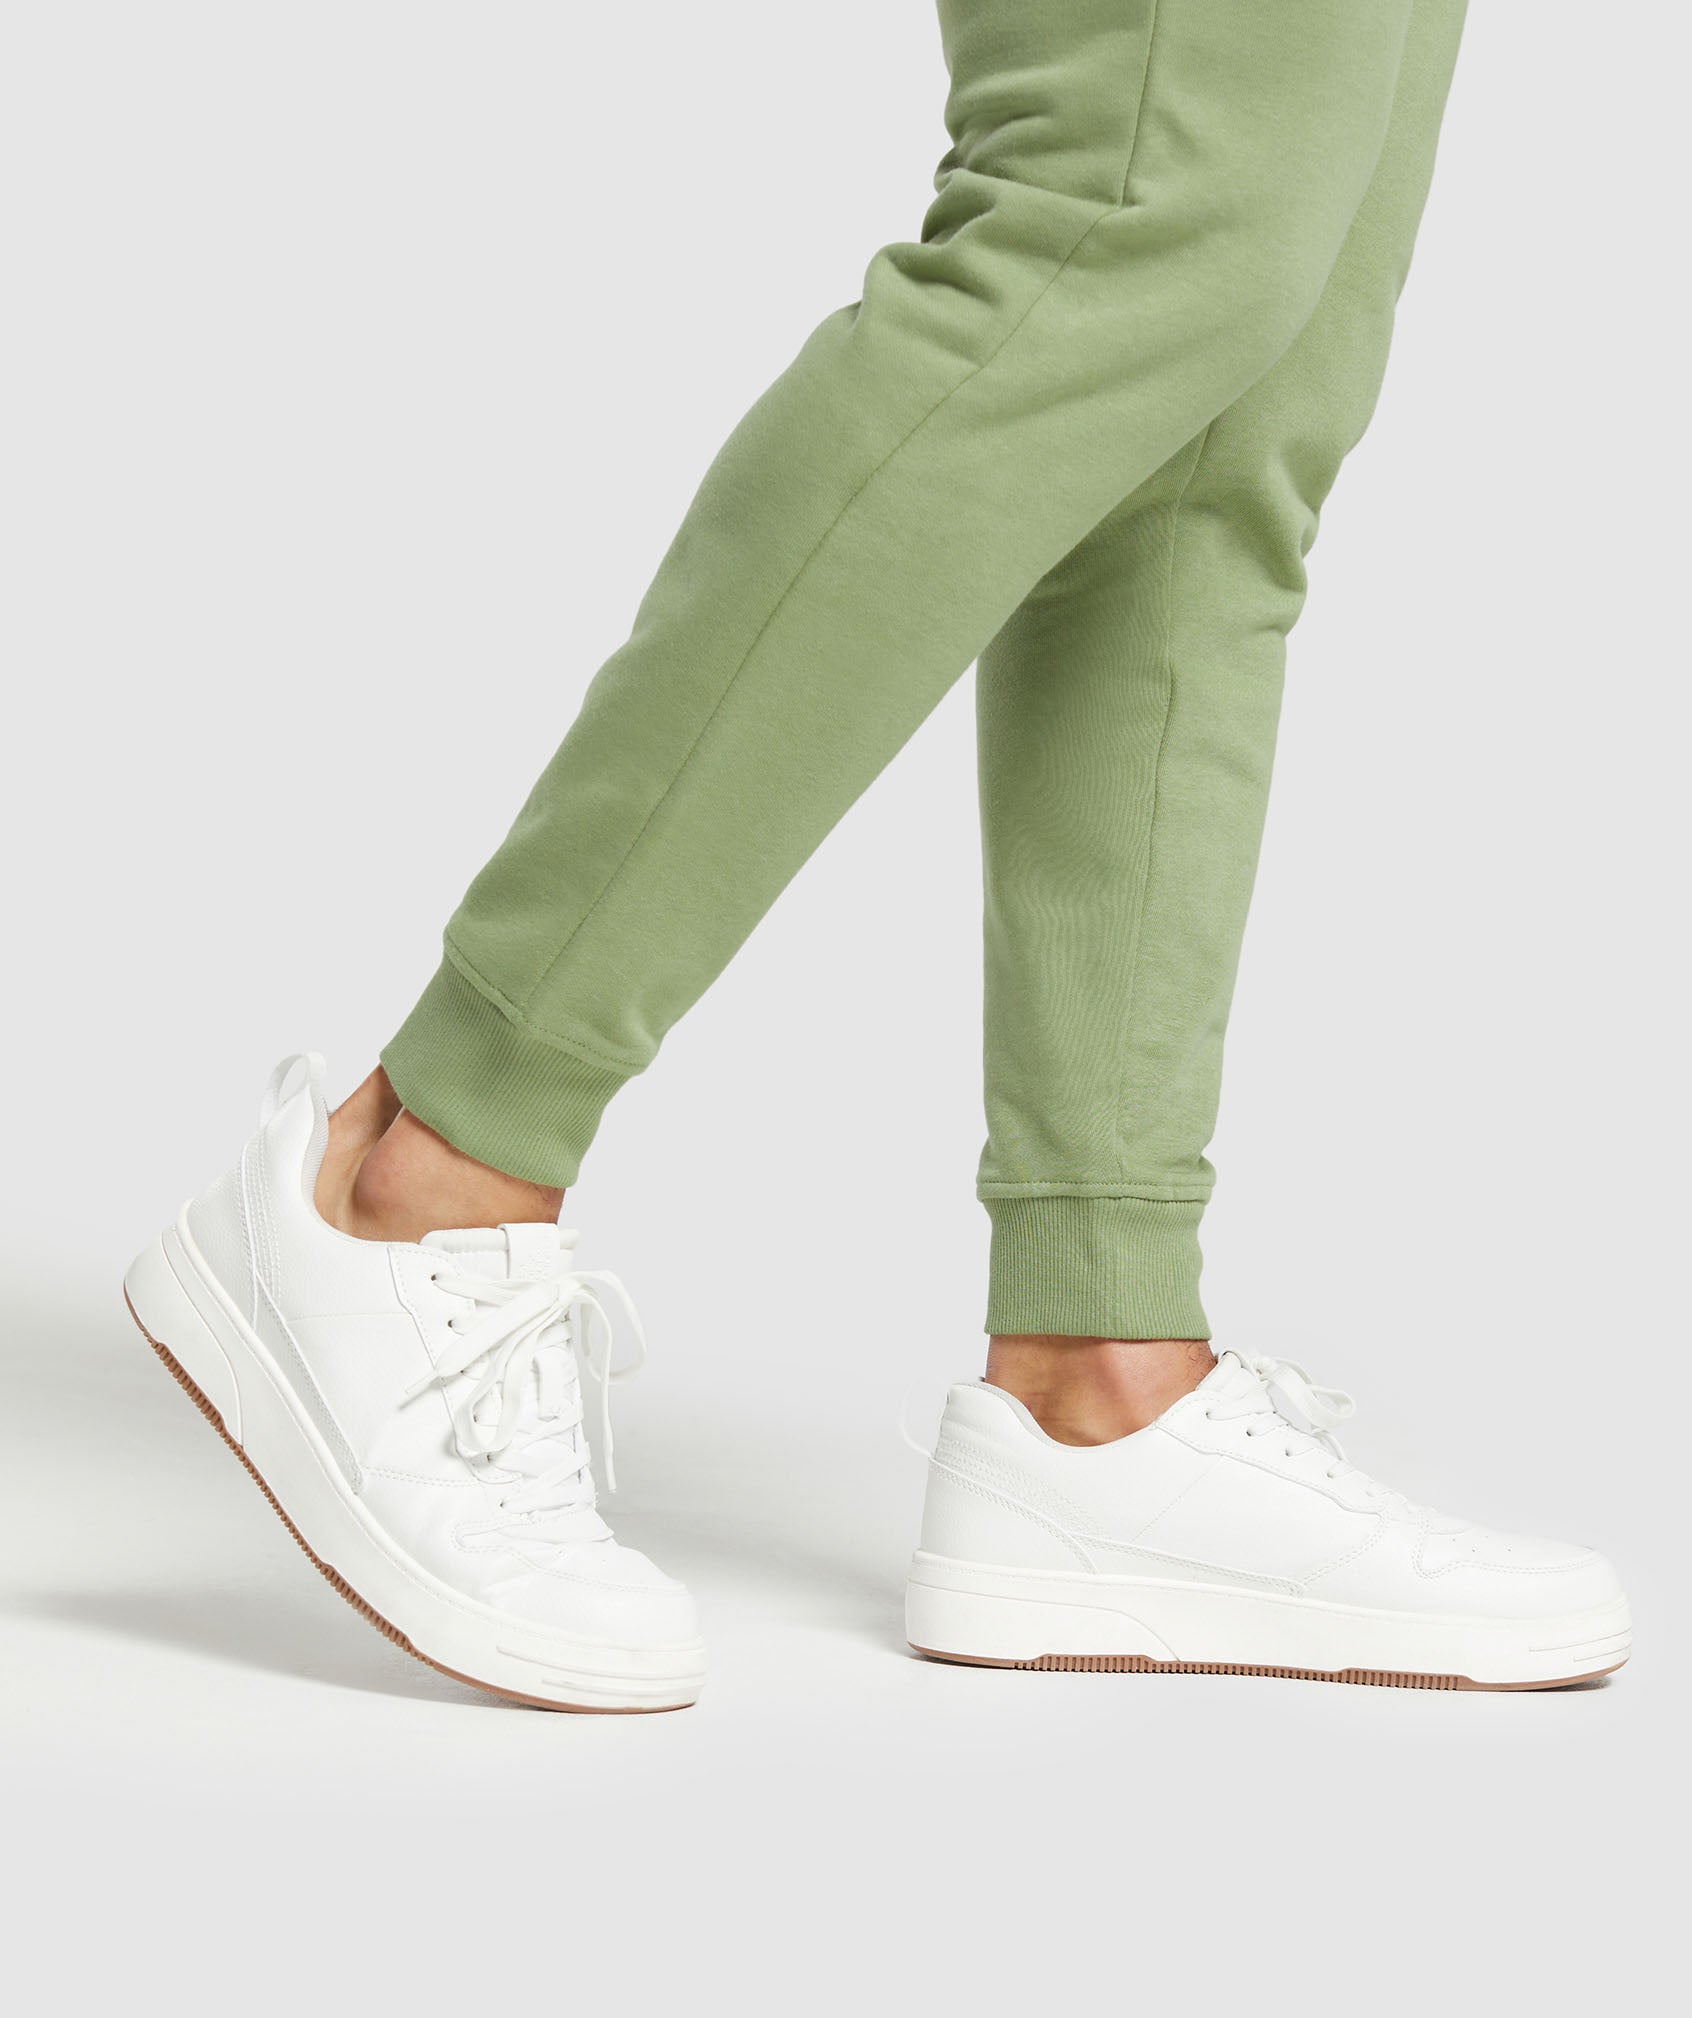 Crest Joggers in Natural Sage Green - view 6